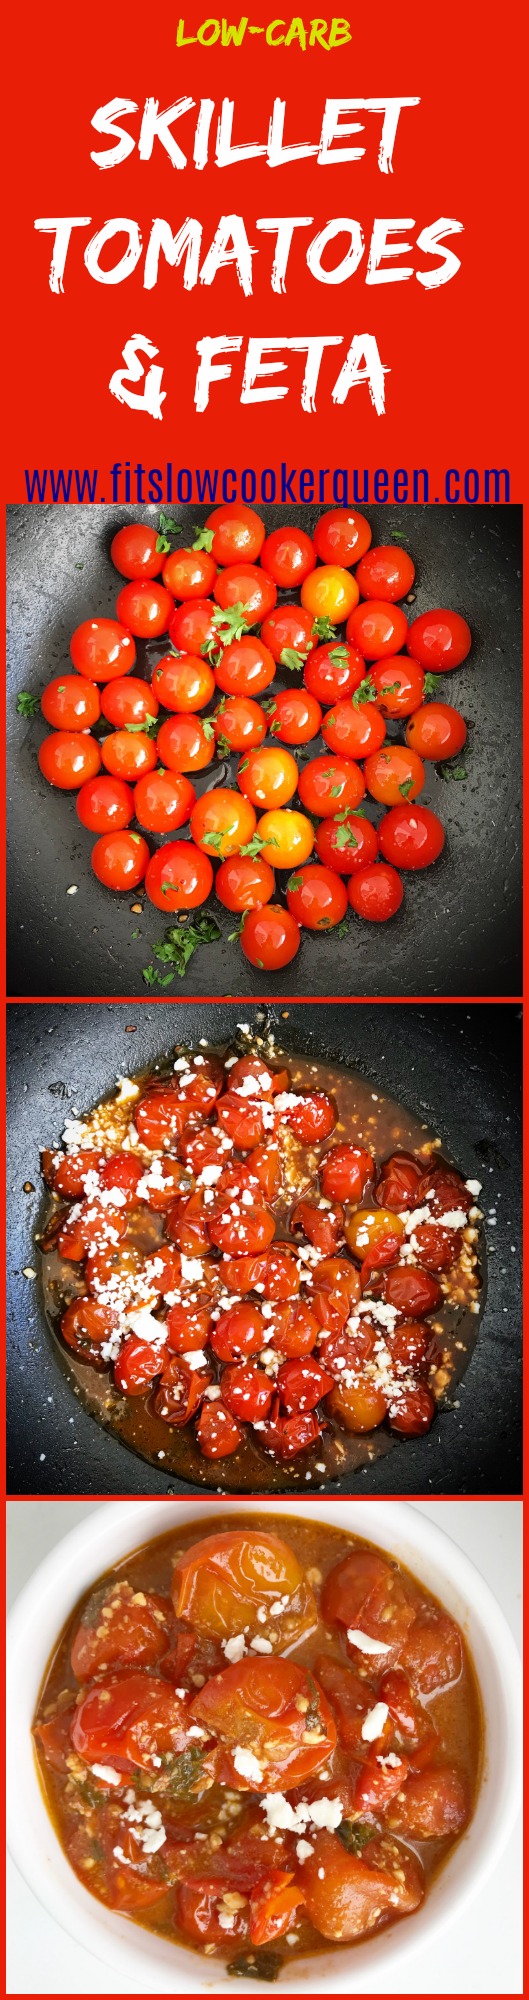 Tomatoes & feta cook together in this quick skillet recipe. Done in under 30 minutes, you can serve this low-carb side dish as an accompaniment to any meal.